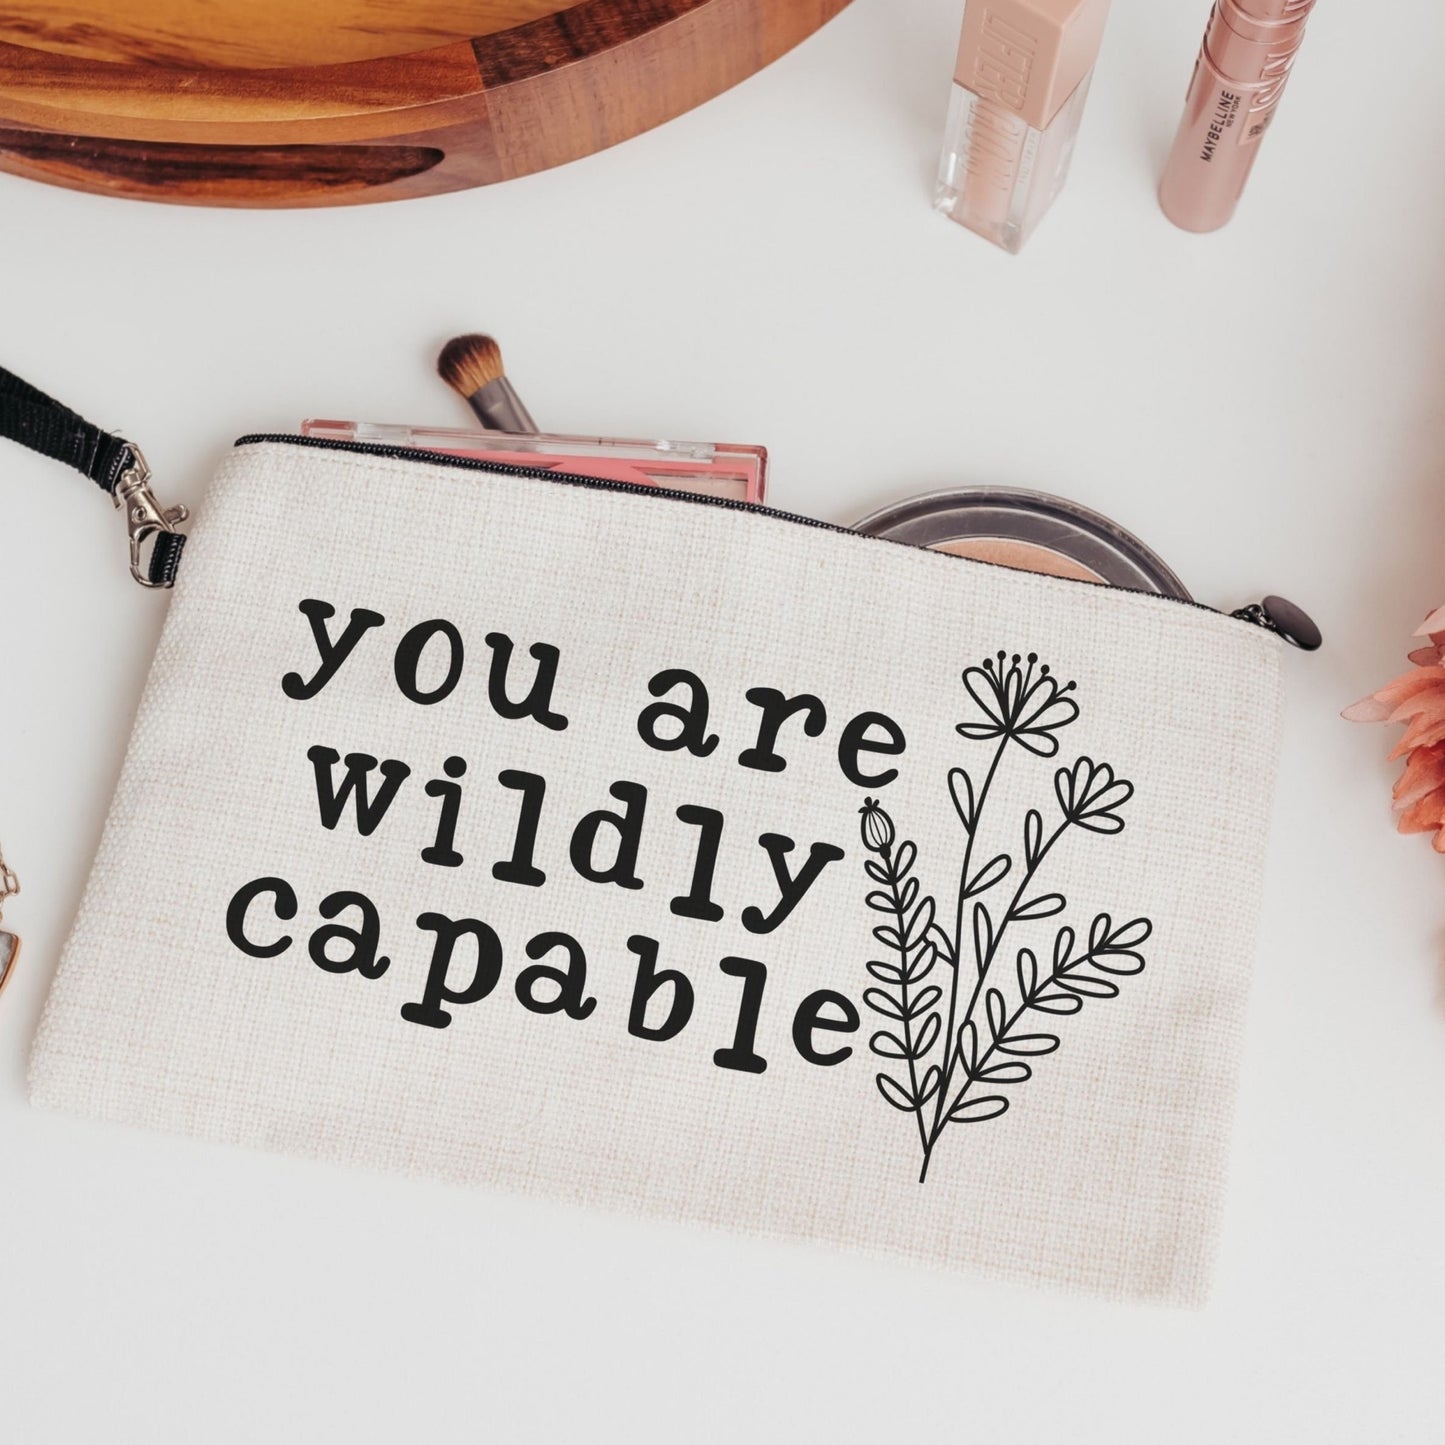 Stylish and Motivational Women's Cosmetic Bag